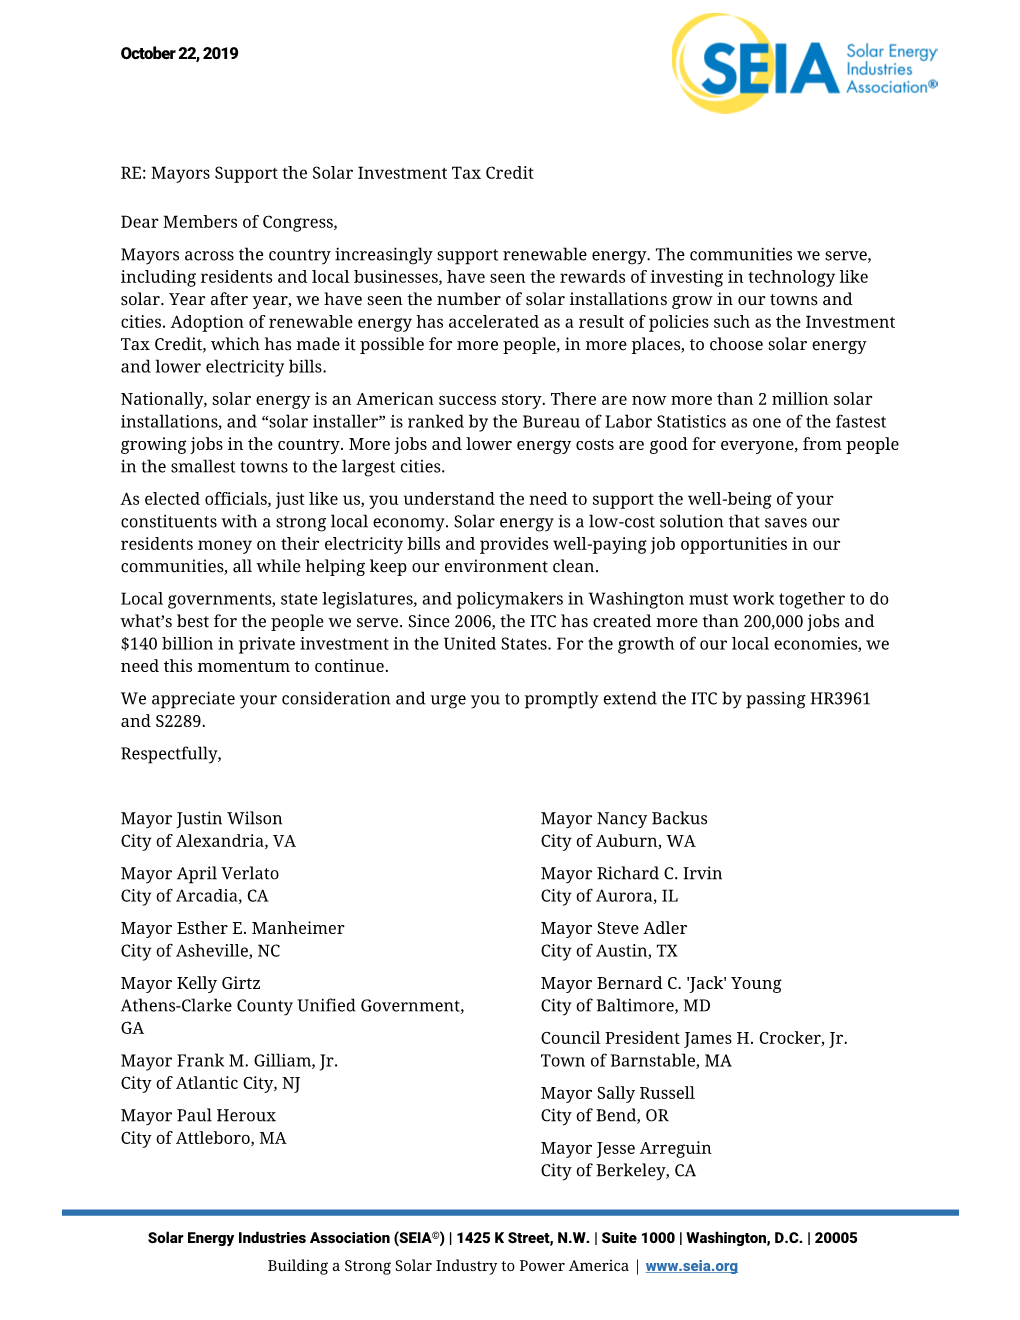 October 22, 2019 RE: Mayors Support the Solar Investment Tax Credit Dear Members of Congress, Mayors Across the Country Increasi